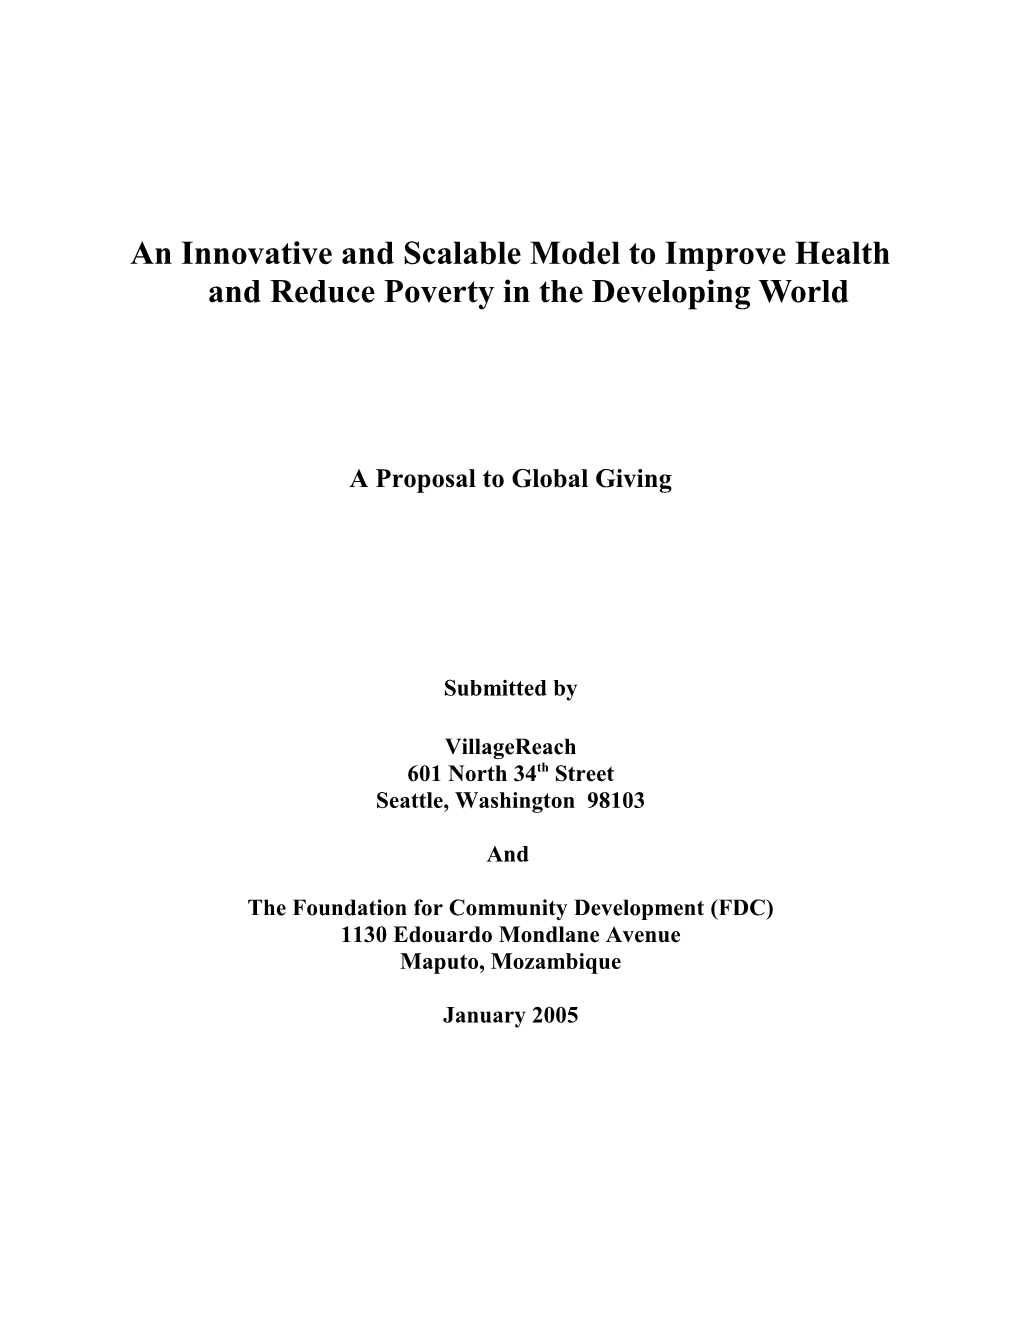 An Innovative and Scalable Model to Improve Health and Reduce Poverty in the Developing World